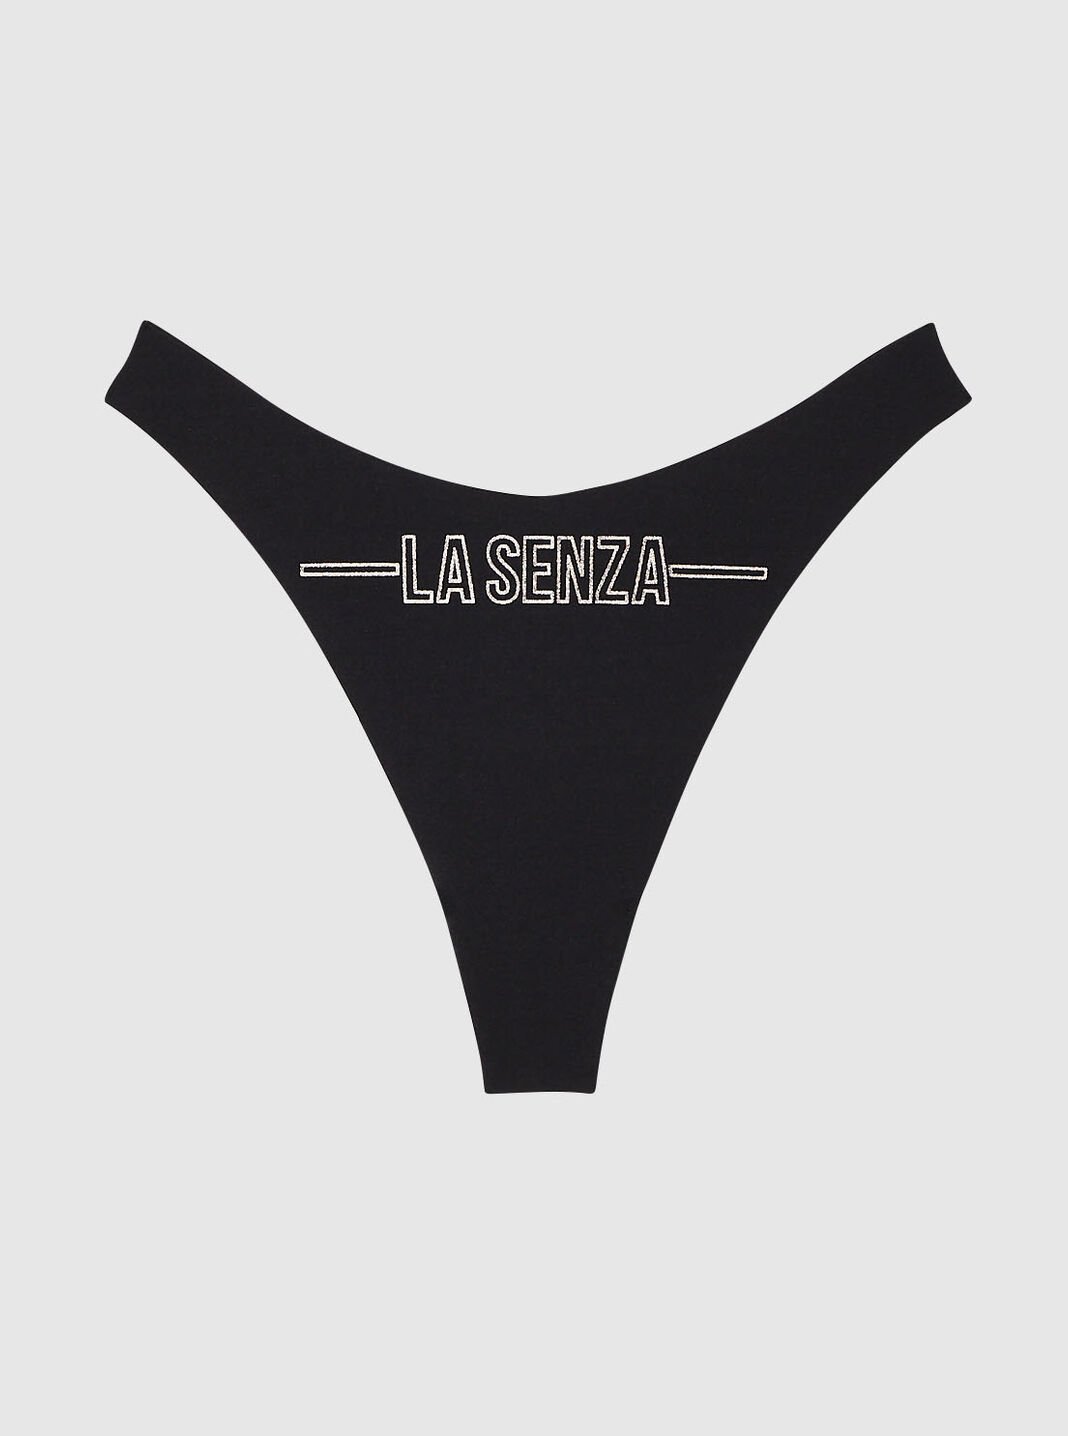 La Senza - This won't lastHURRY! 10/$35 panties going on now